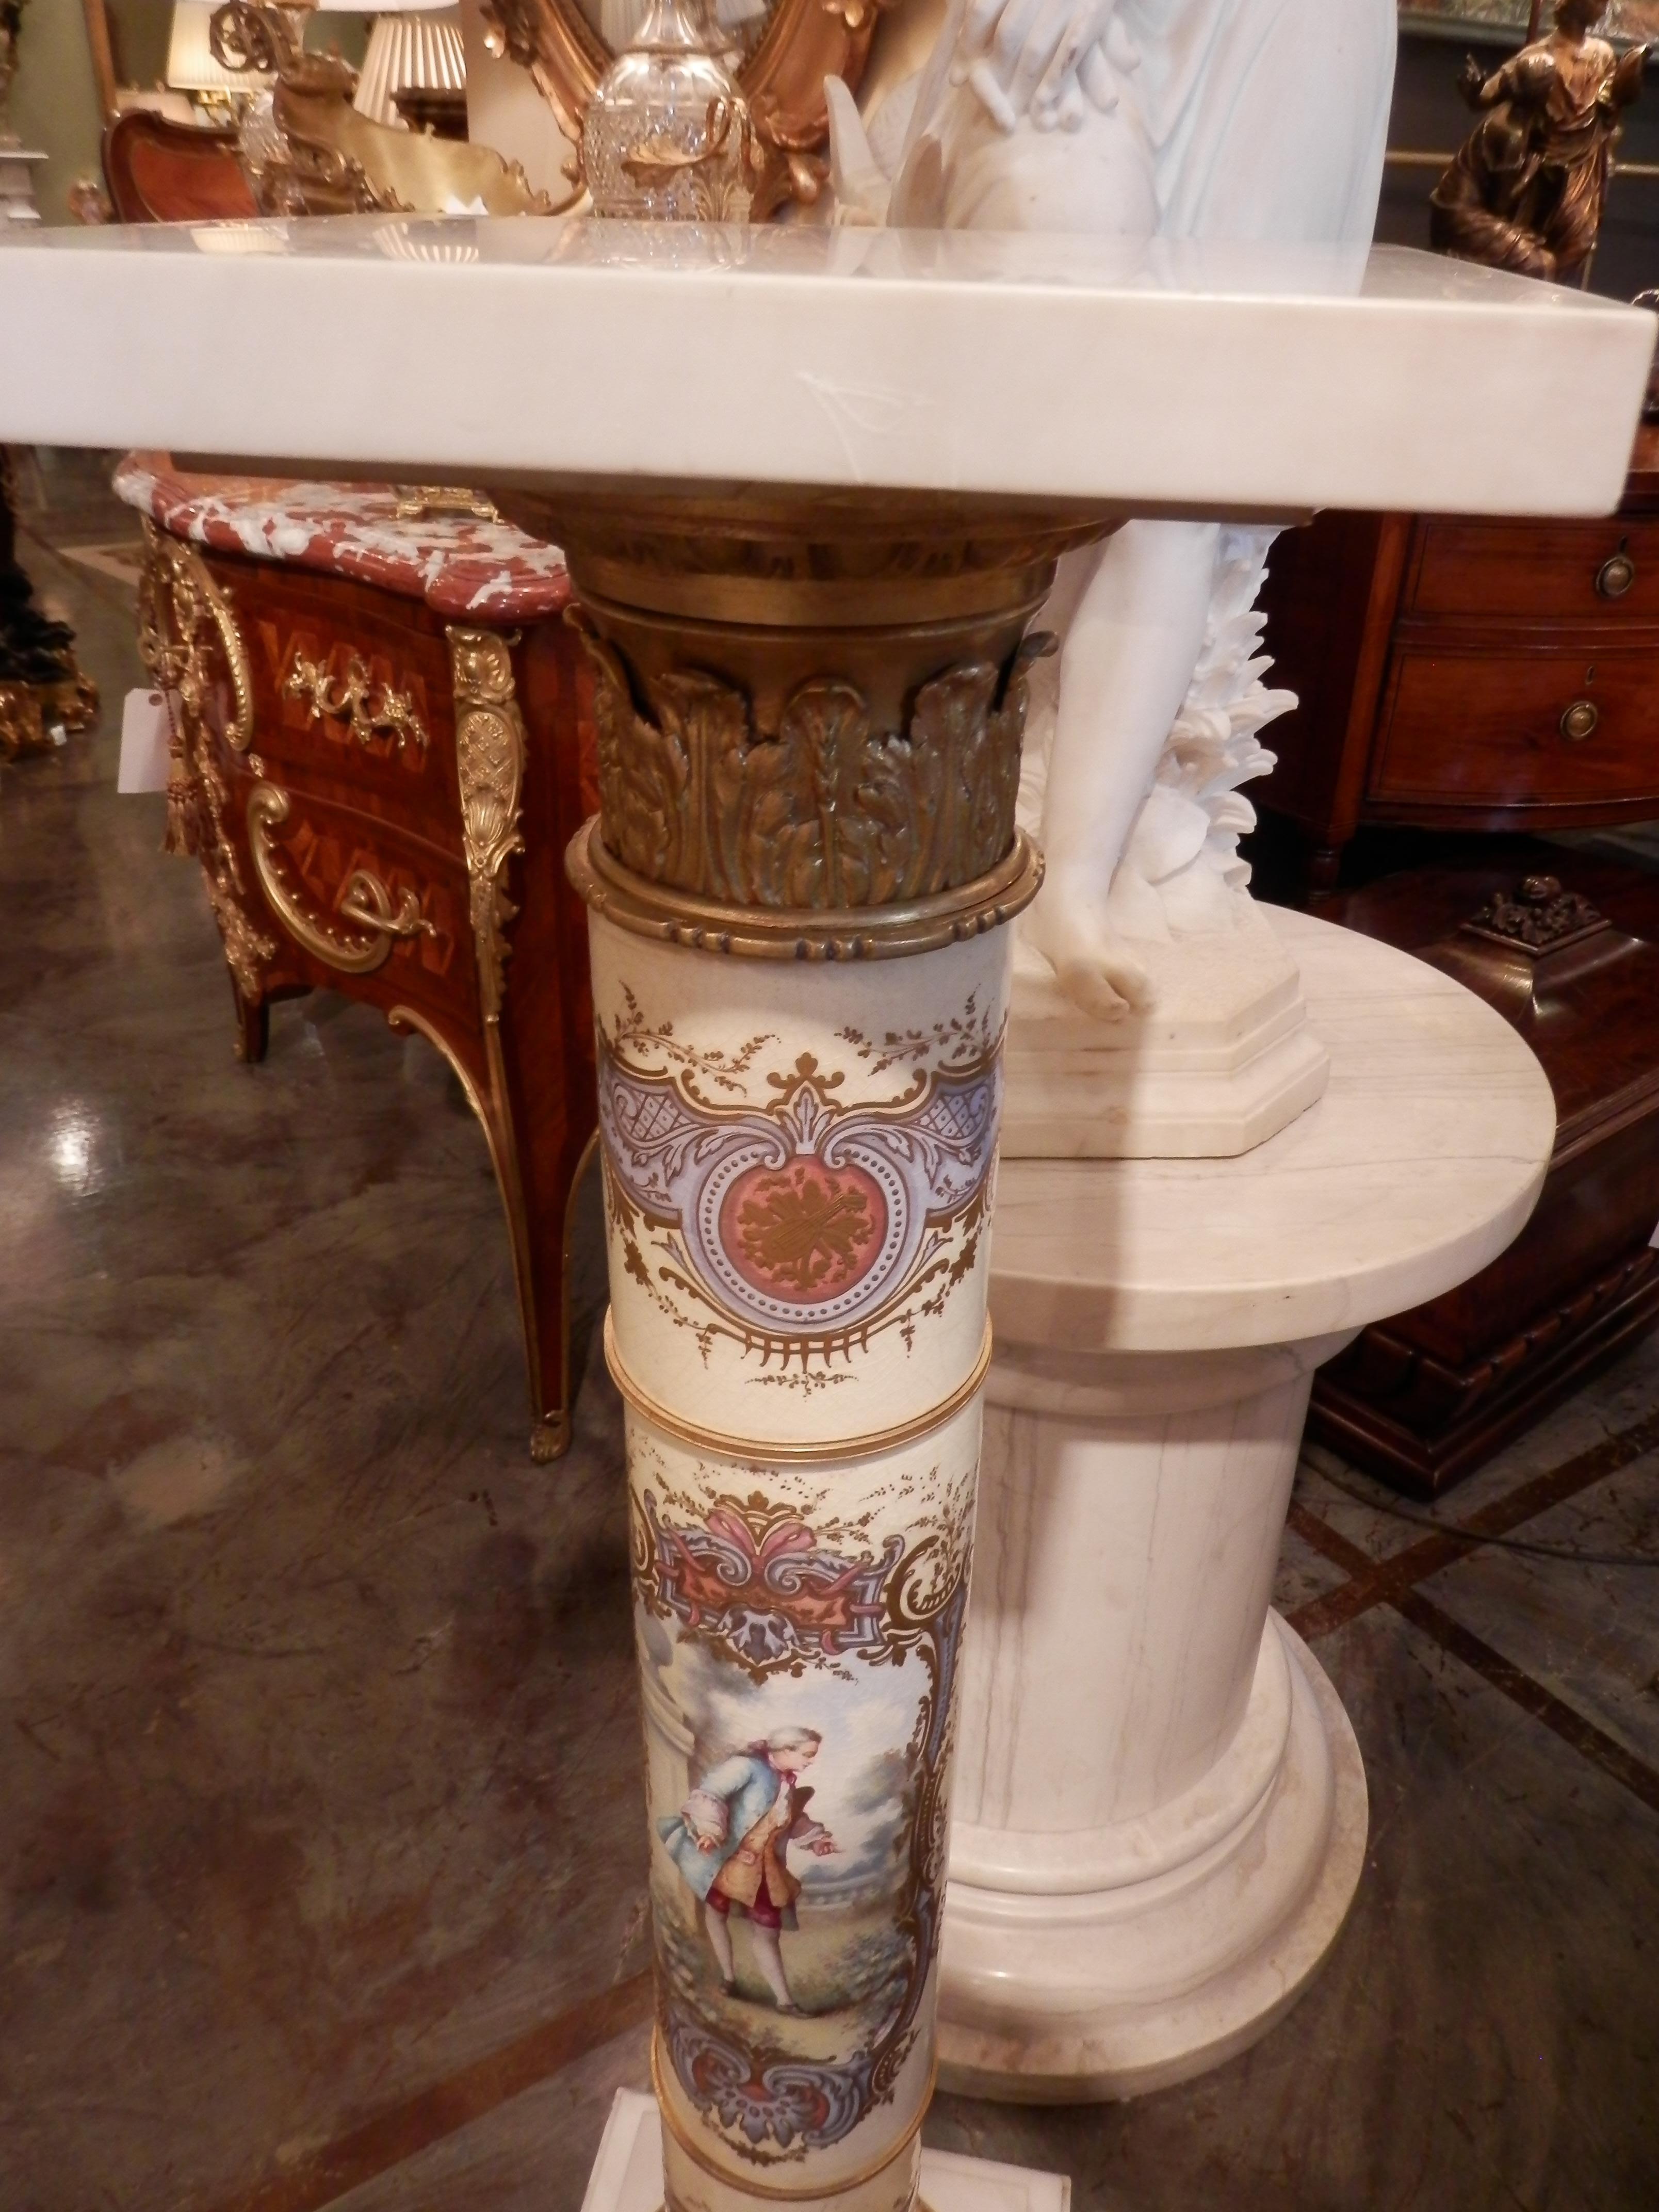 A fine 19th century French Serve's porcelain pedestal with raised detail and fine gilt bronze mounts. Carrera marble top and base.